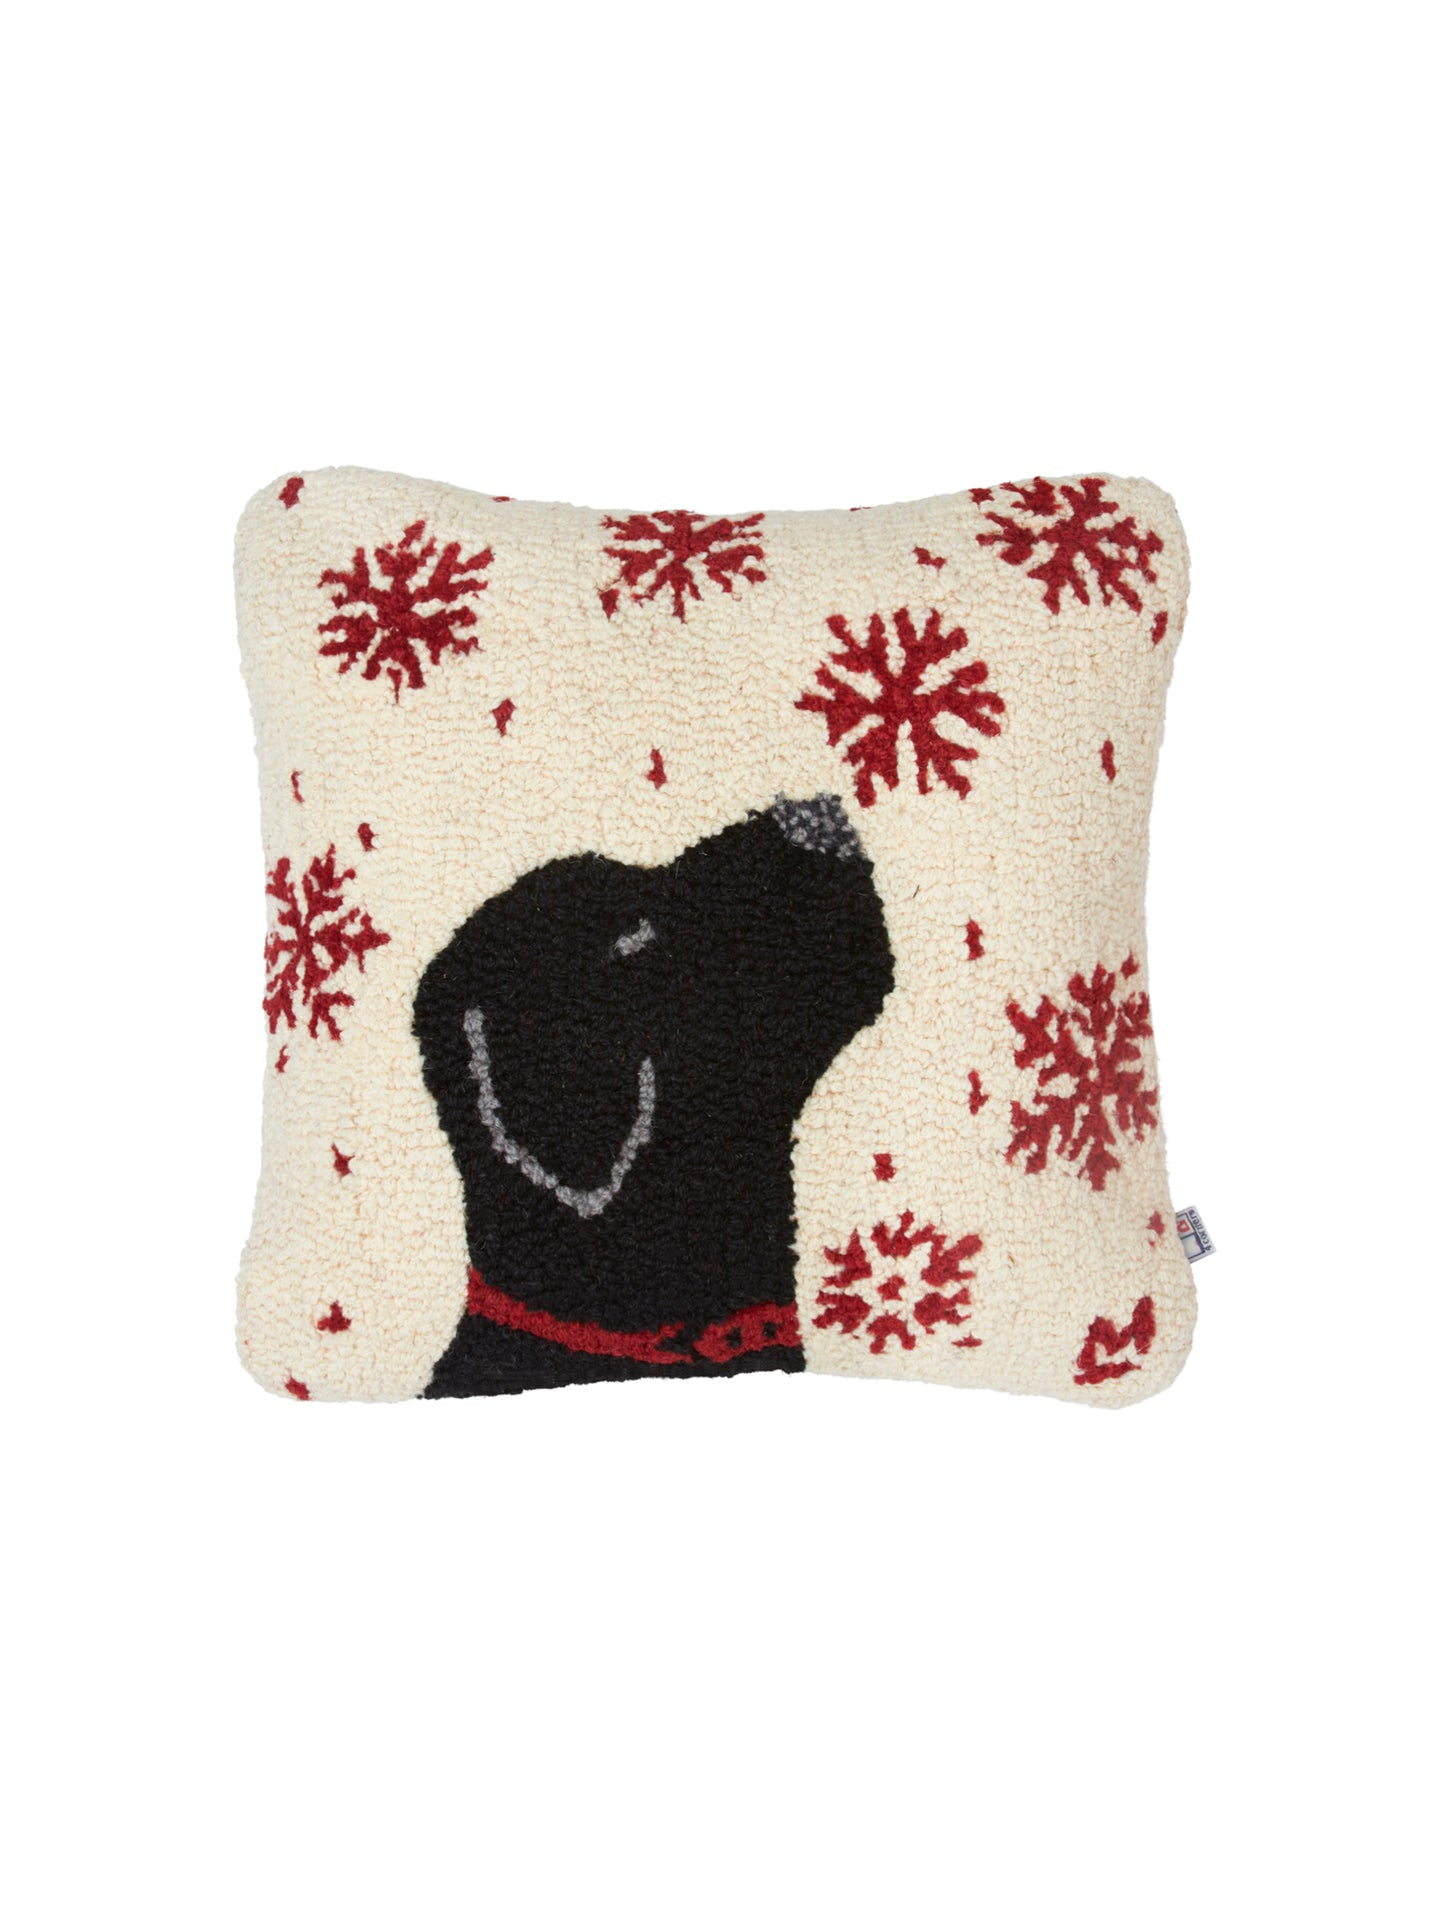 Catching Flakes Black Lab Hooked Wool Square Pillow Weston Table